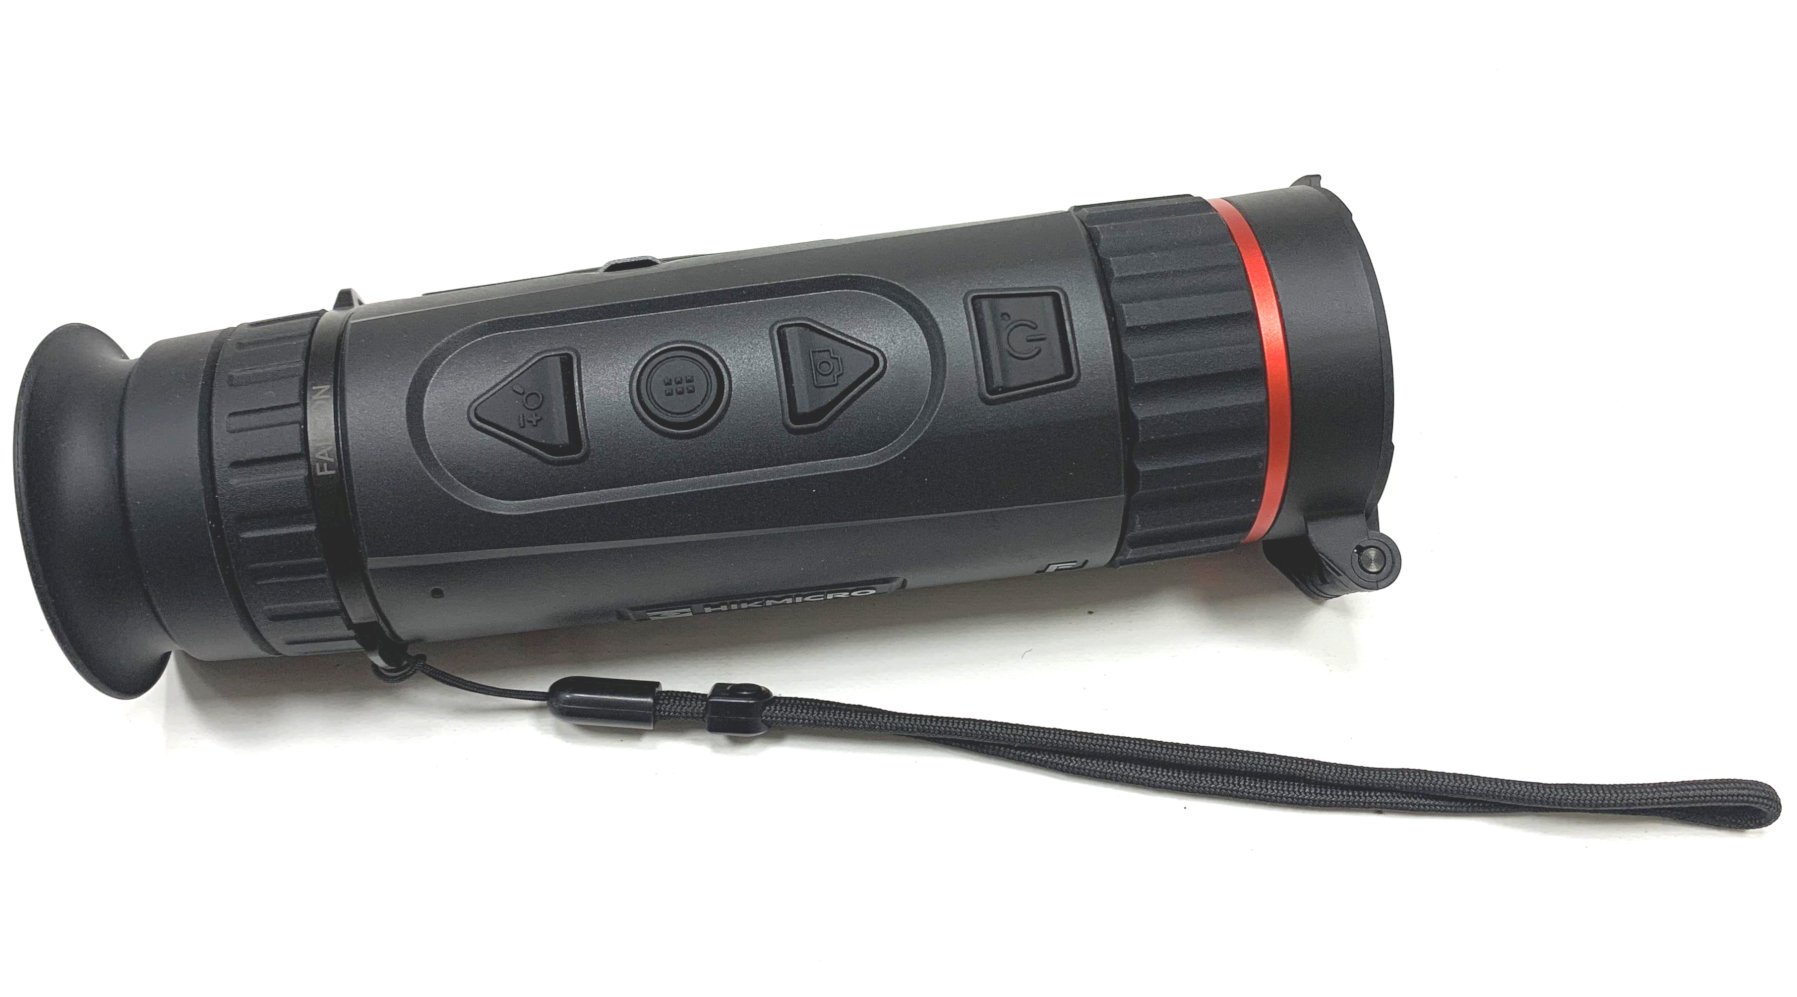 hik micro falcon fh35 thermal imager